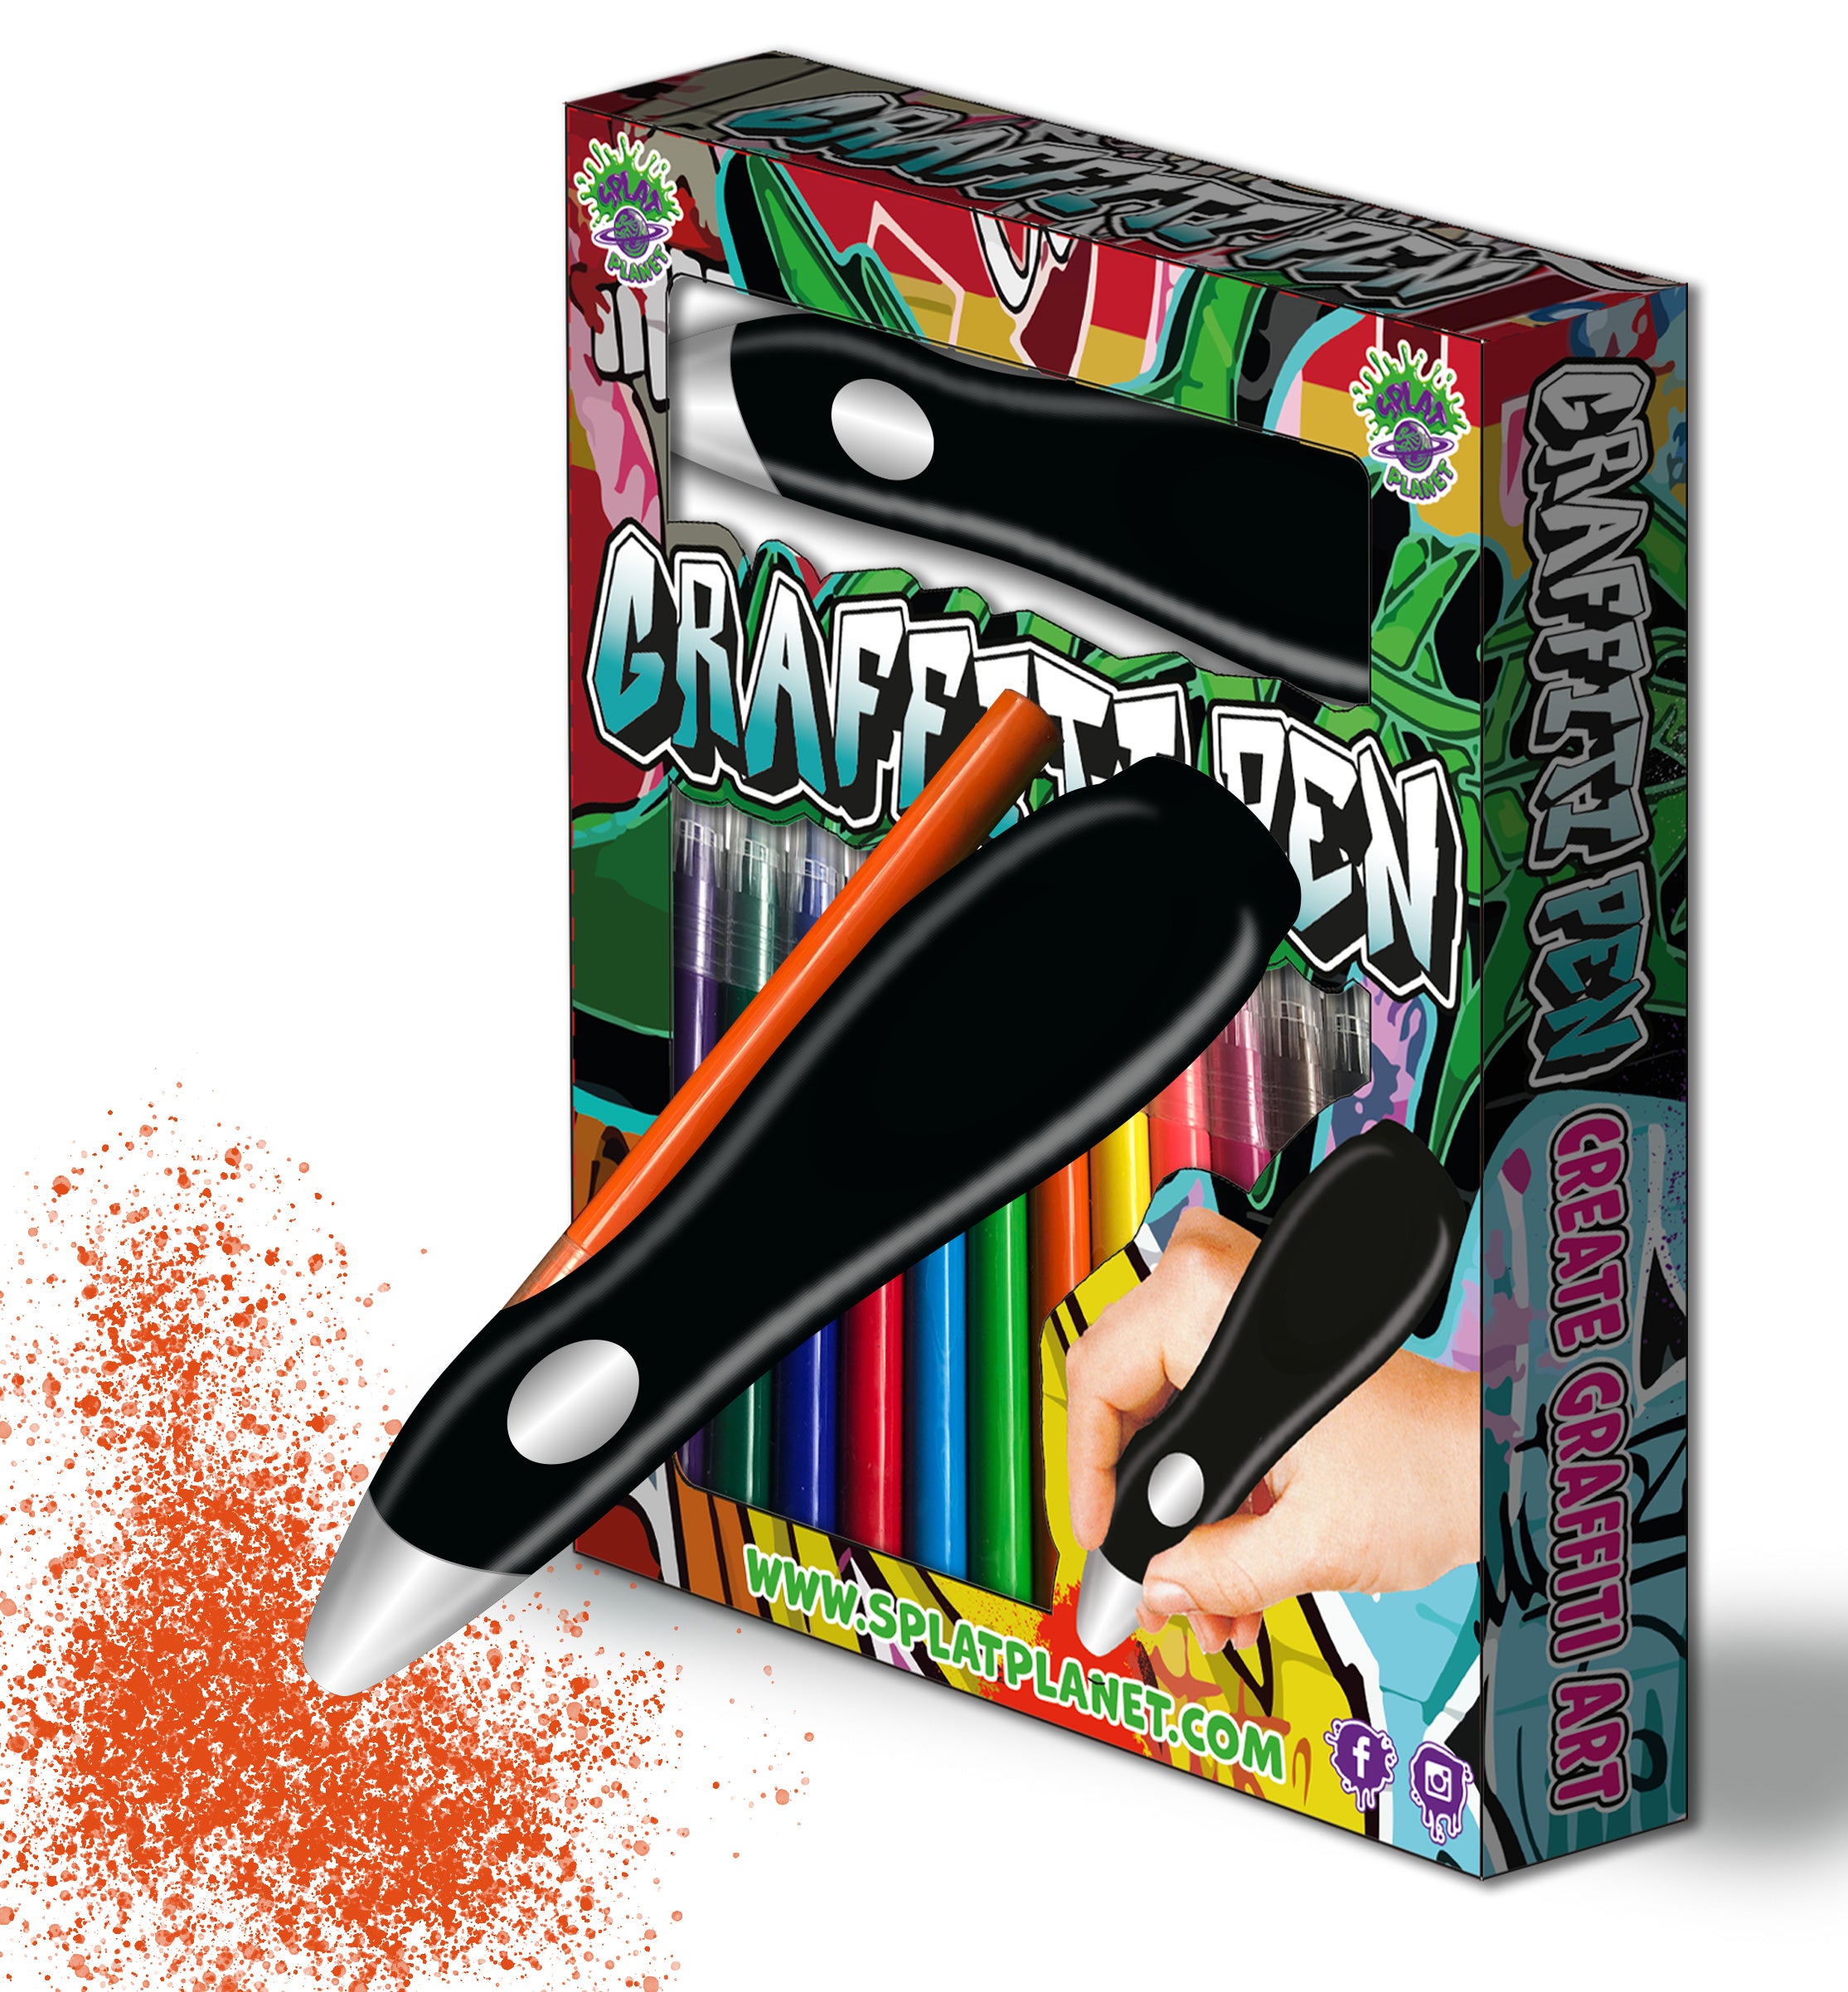 Electric Graffiti pen, airbrush pen, electric airbrush pen, blow pens, magic graffiti pen, washable fabric pens, washable graffiti, non toxic graffiti, practise graffiti markers, crayola airbrush, airbrush set, kids airbrush kit, graffiti colouring, create your own t-shirt, kids gifts, unique gifts for kids, kids graffiti, washable markers, graffiti art